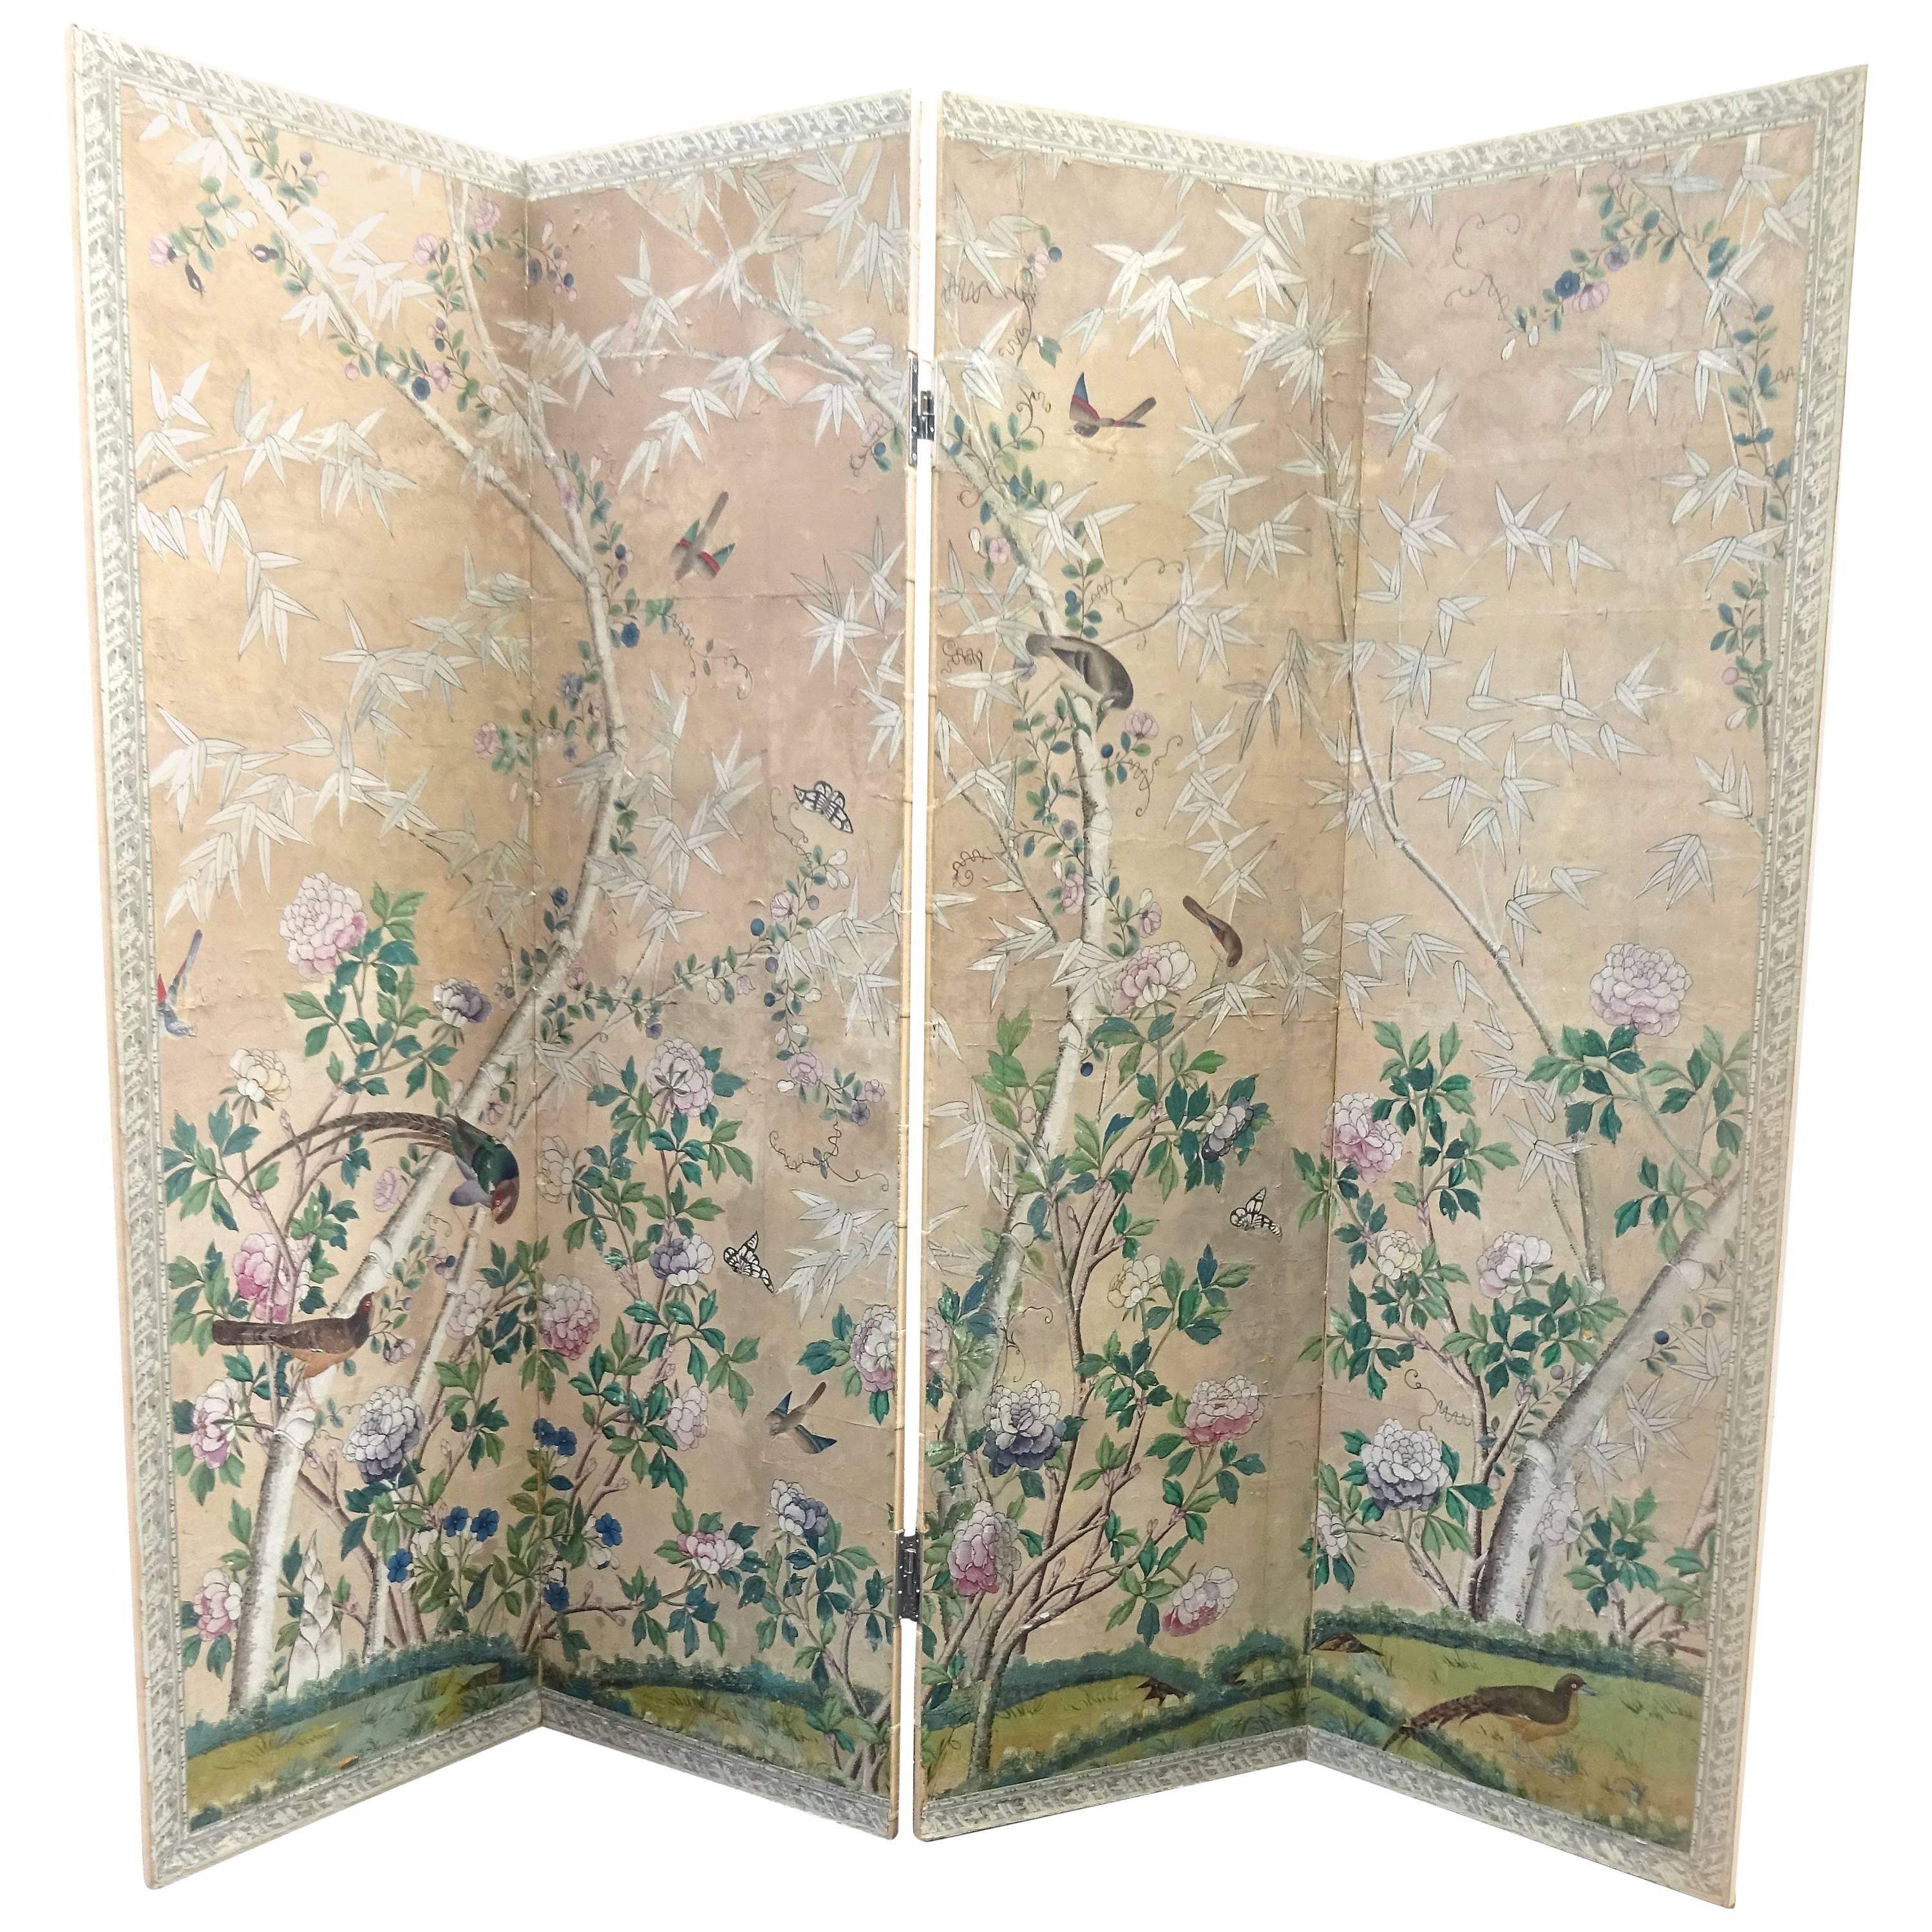 Rare Monumental 18th Century Chinese Painted Wallpaper Folding Screen